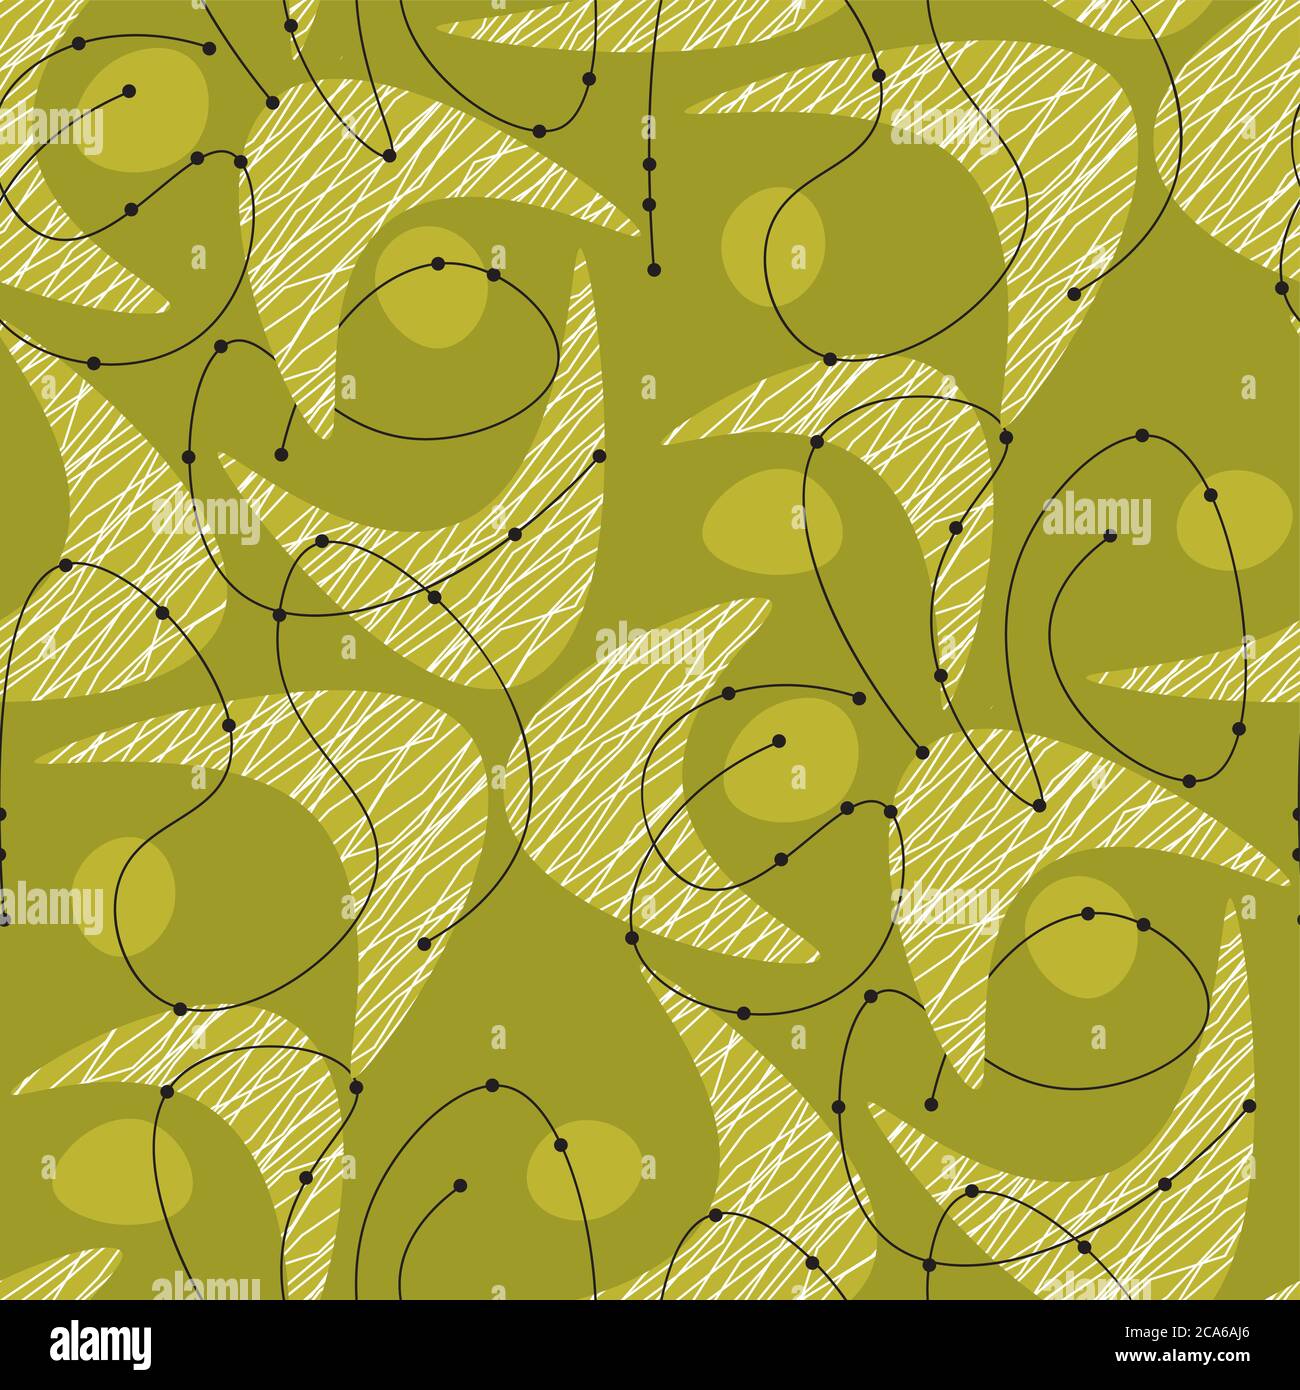 Midcentury vibes green pattern with boomerang shapes. Retro style geometric forms and lines seamless pattern for background, fabric, textile, wrap, su Stock Vector